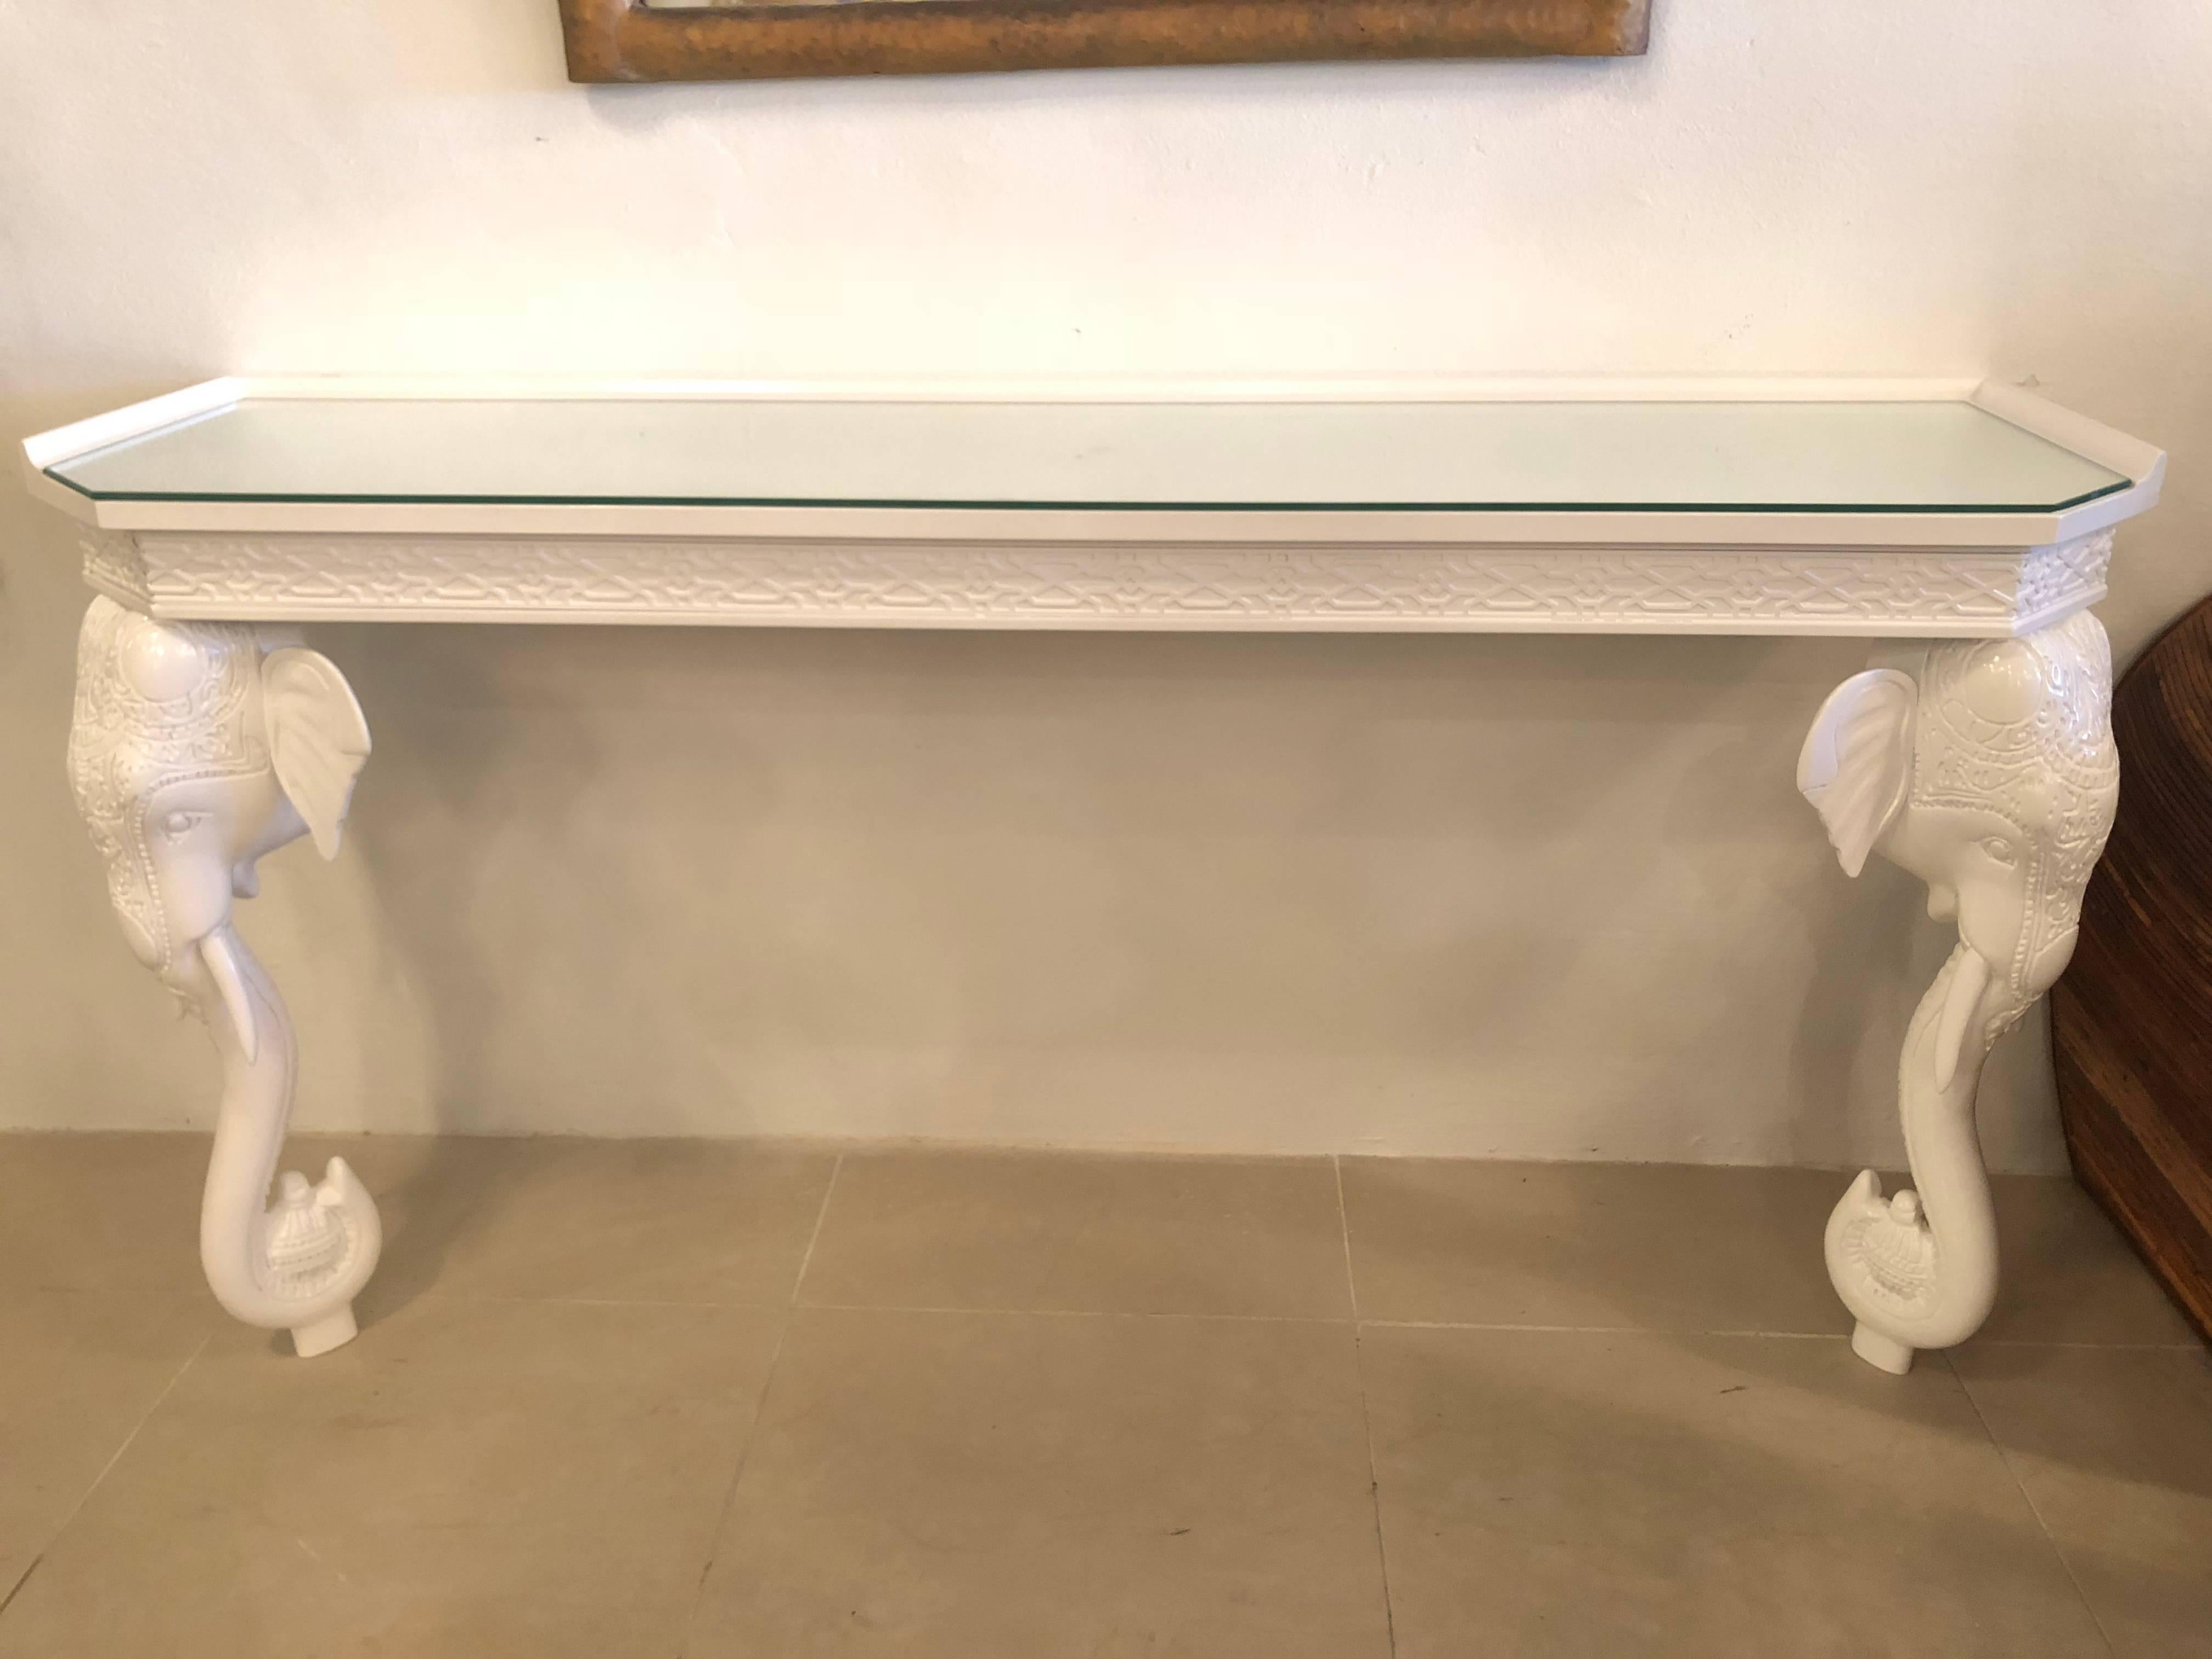 Wood Gampel and Stoll Elephant Wall Console Table Newly Lacquered Fret Glass Top